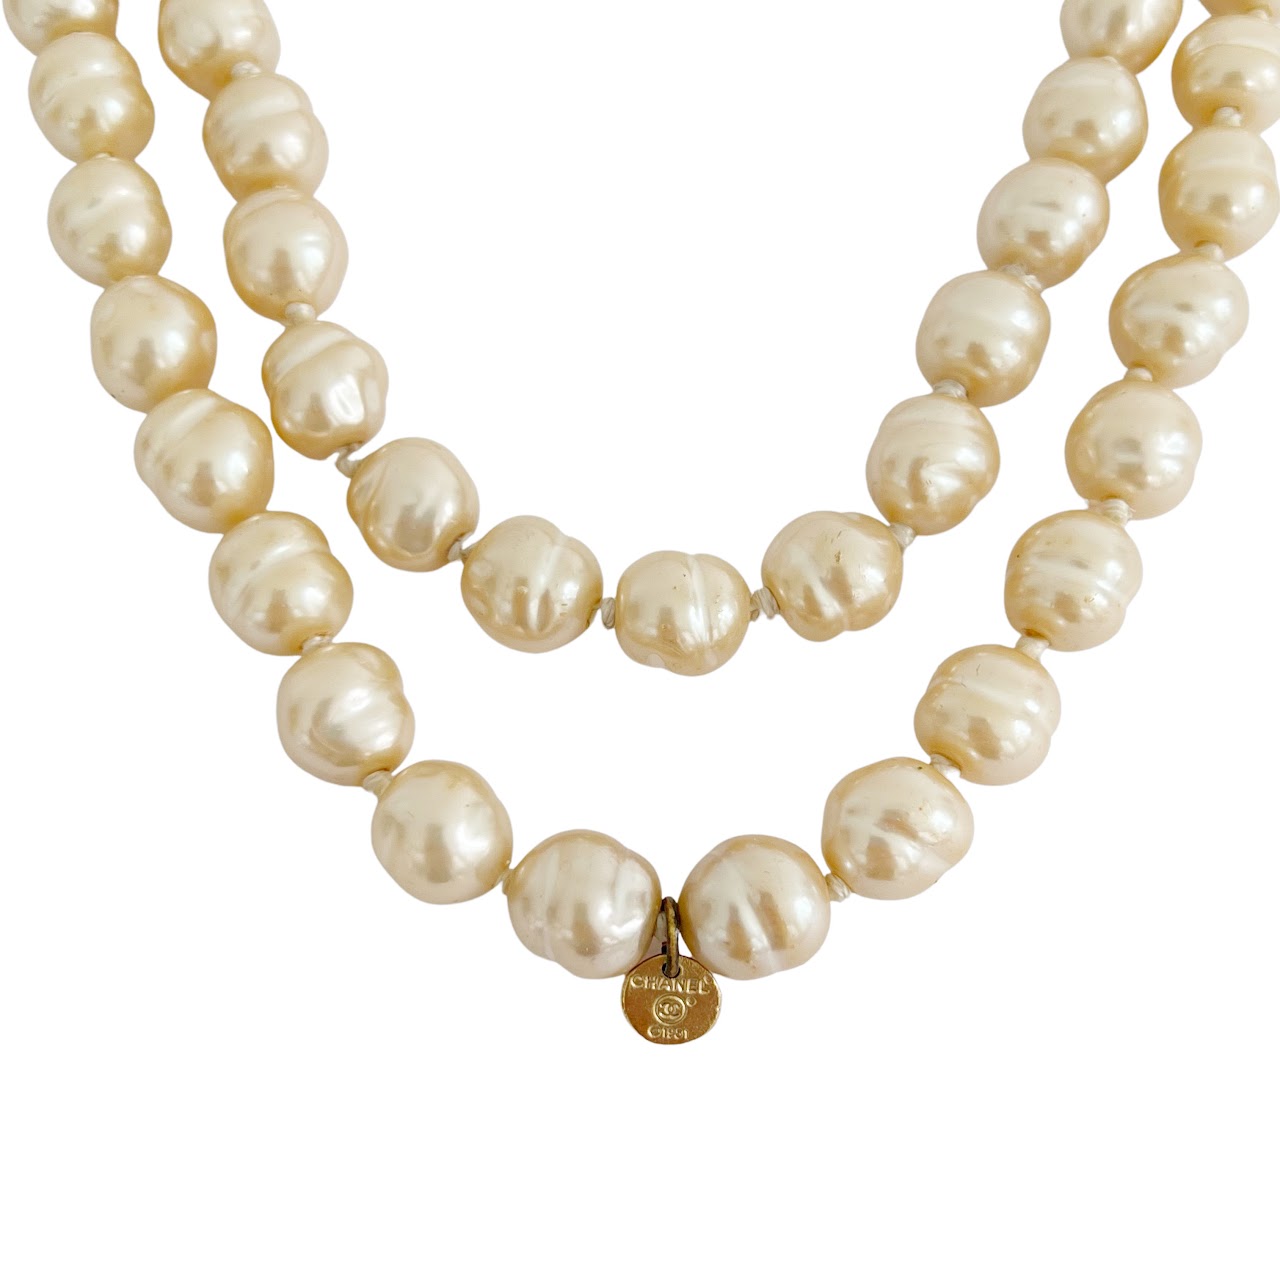 Chanel 1981 Pearl Necklace